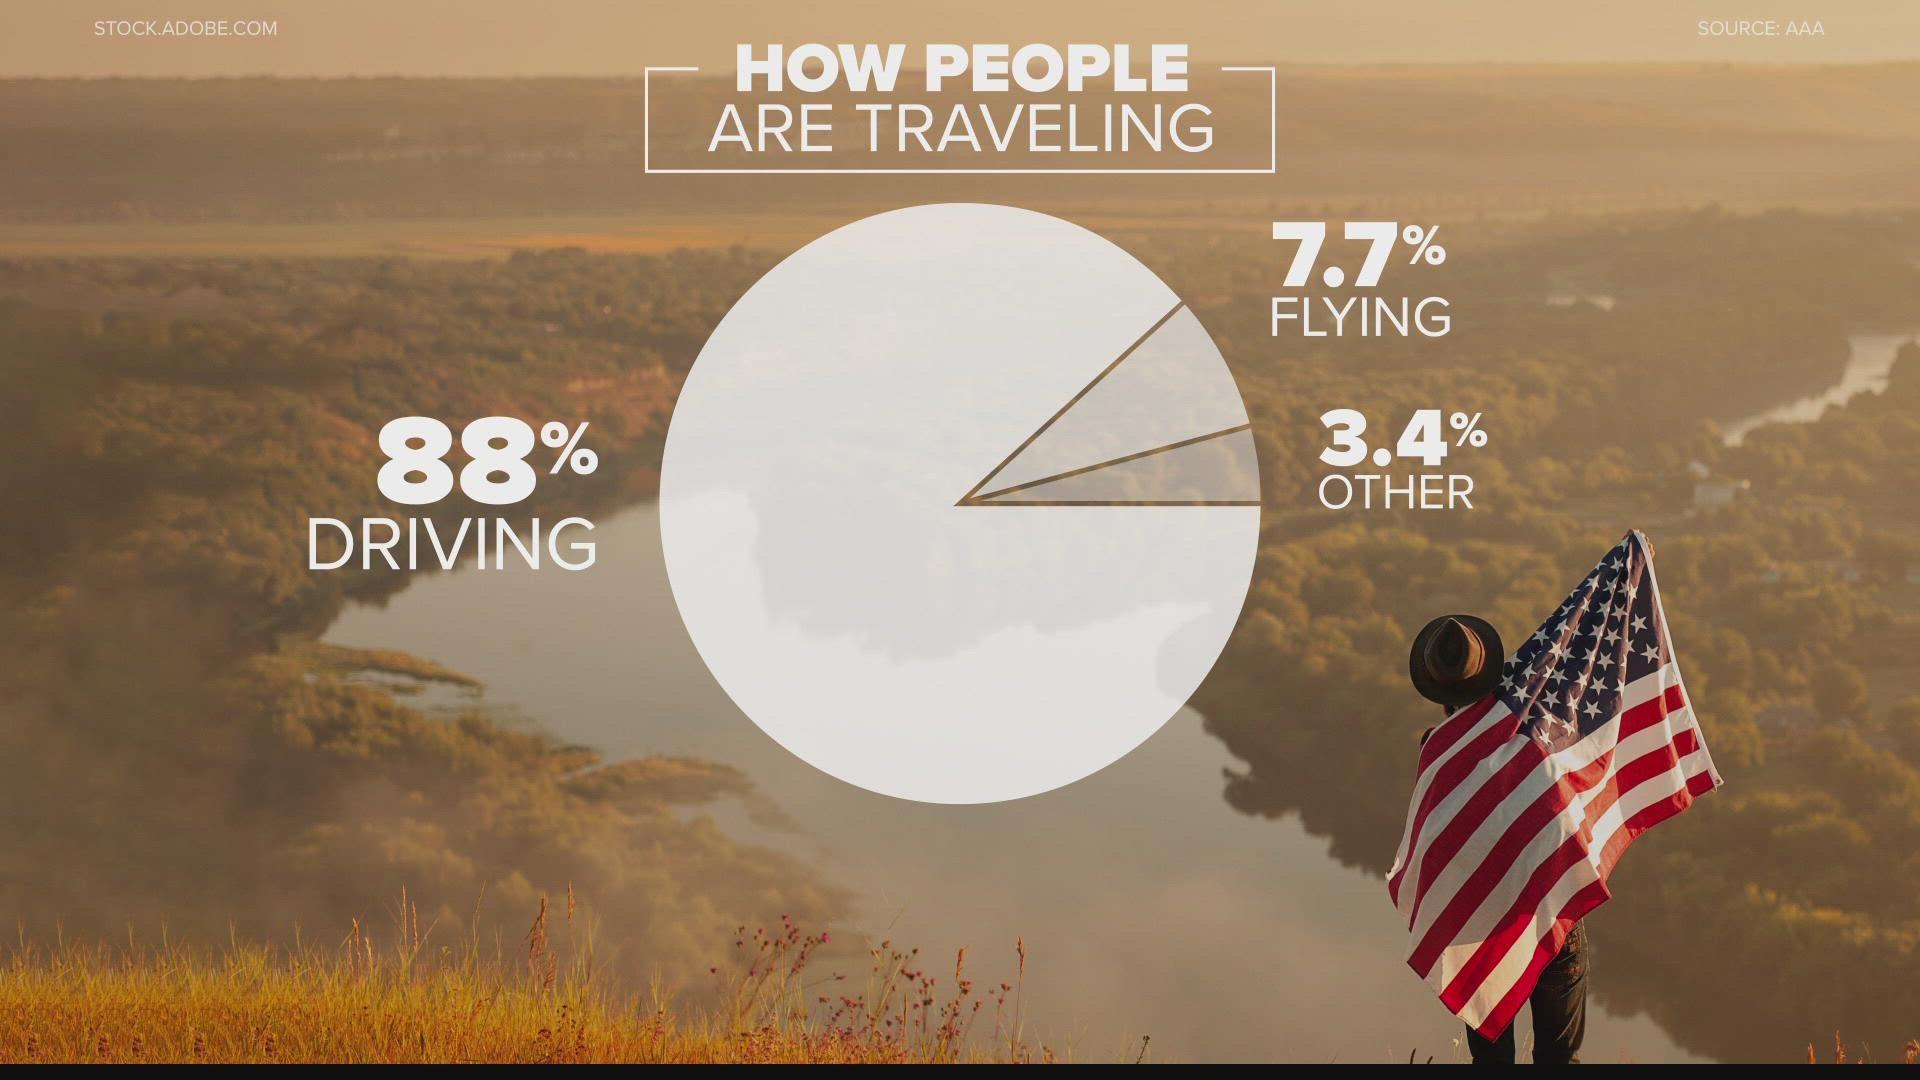 This year, nearly 40 million people are expected to travel for the holiday weekend.